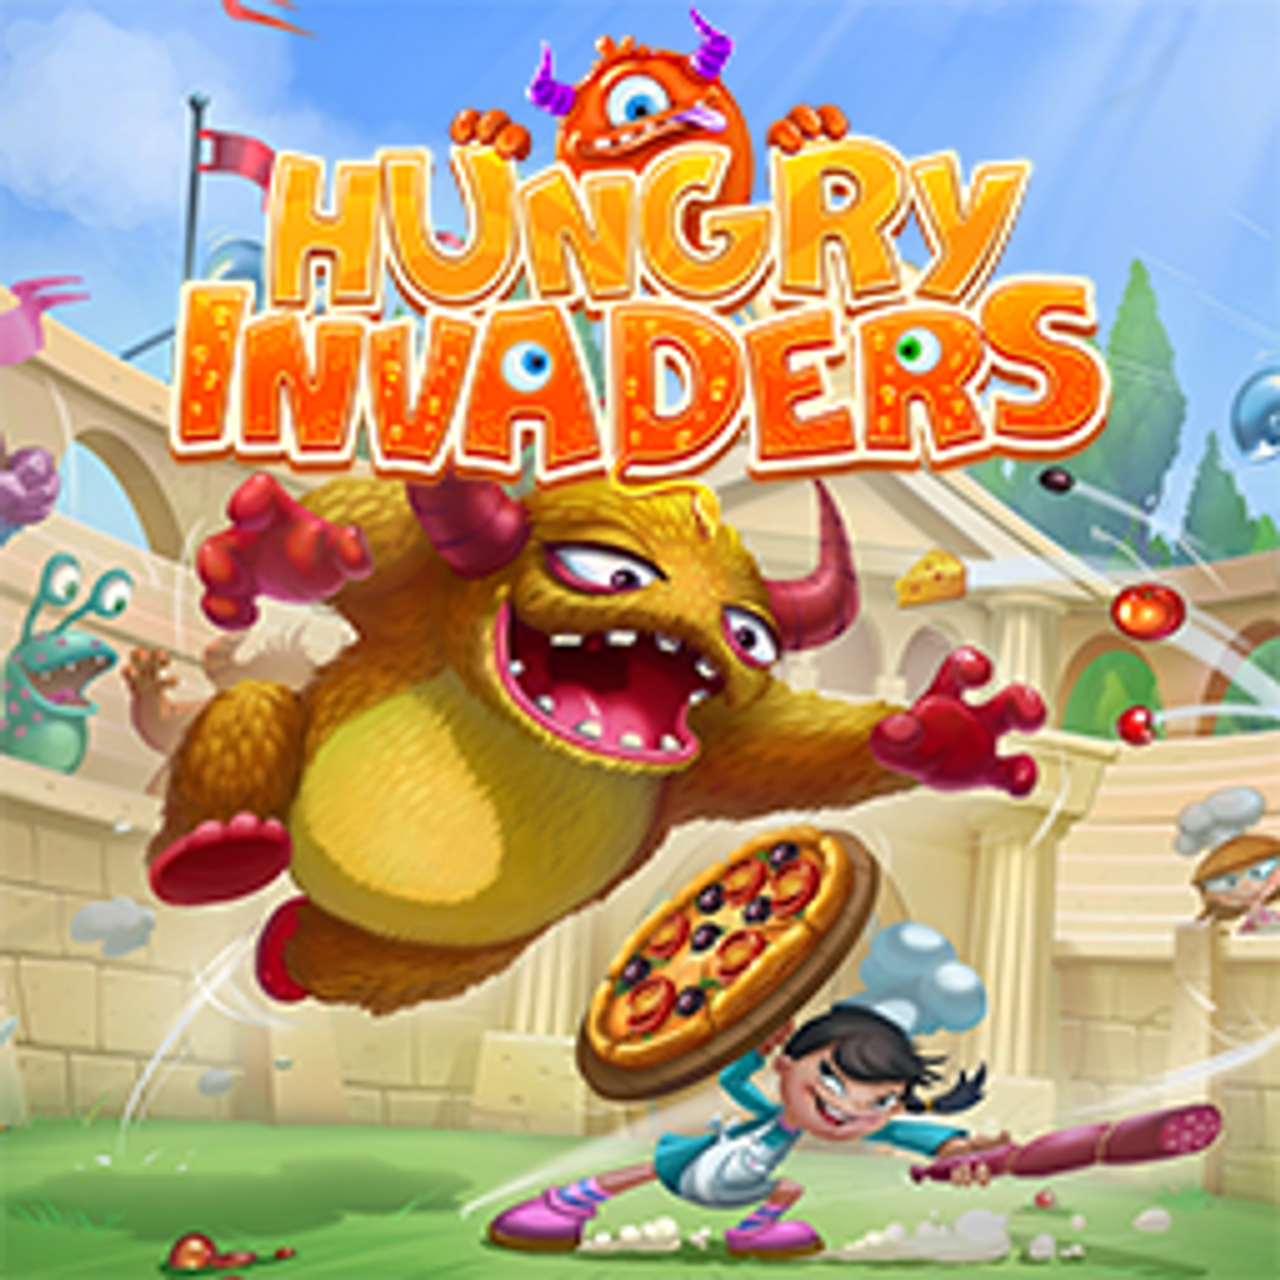 Hungry Invaders